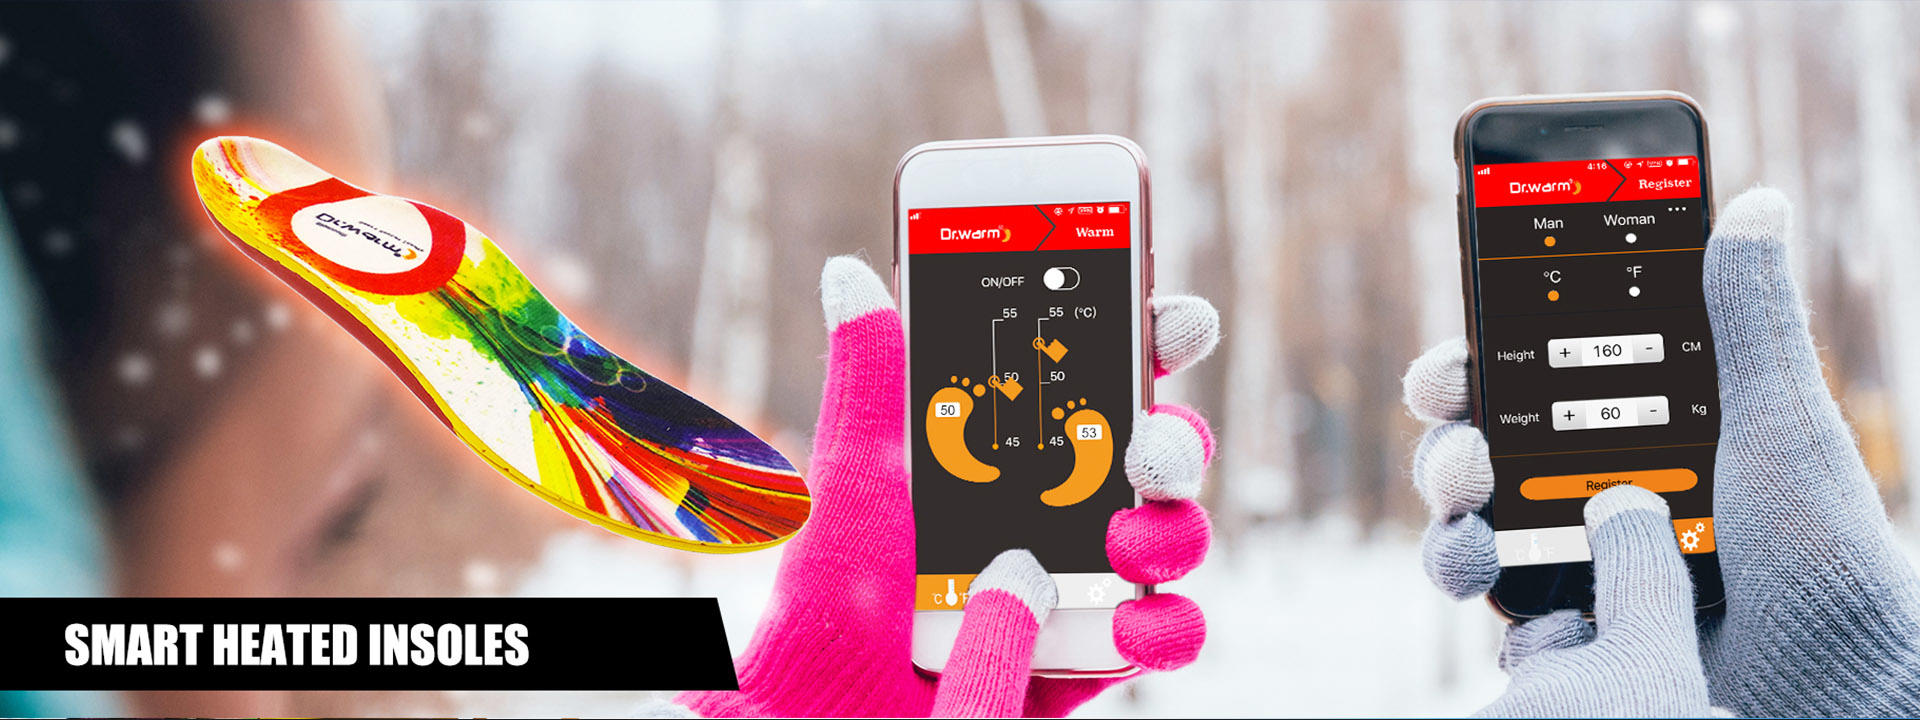 Dr. Warm skiing heated bluetooth insoles lasts for 3-7hours for ice house-3